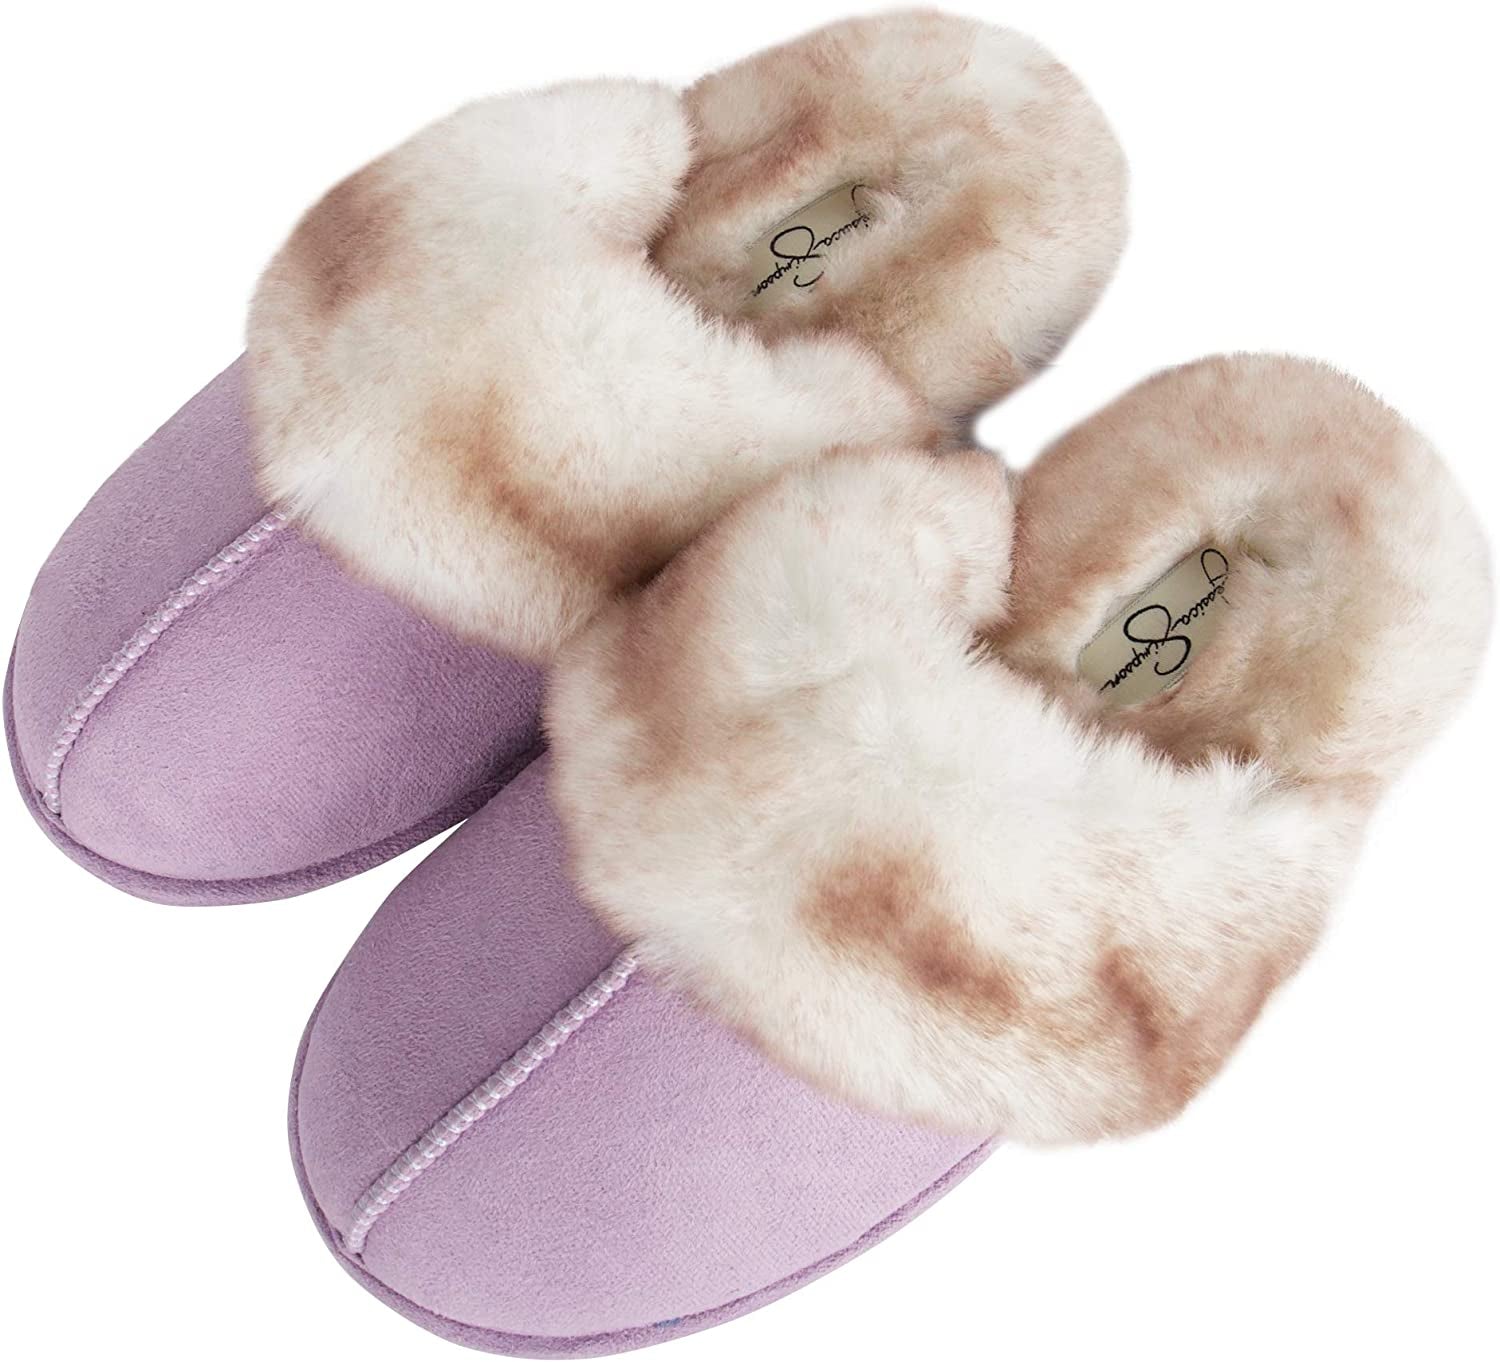 Women's Comfortable Faux Fur House Slipper Scuff with Memory Foam and Anti-Skid Sole